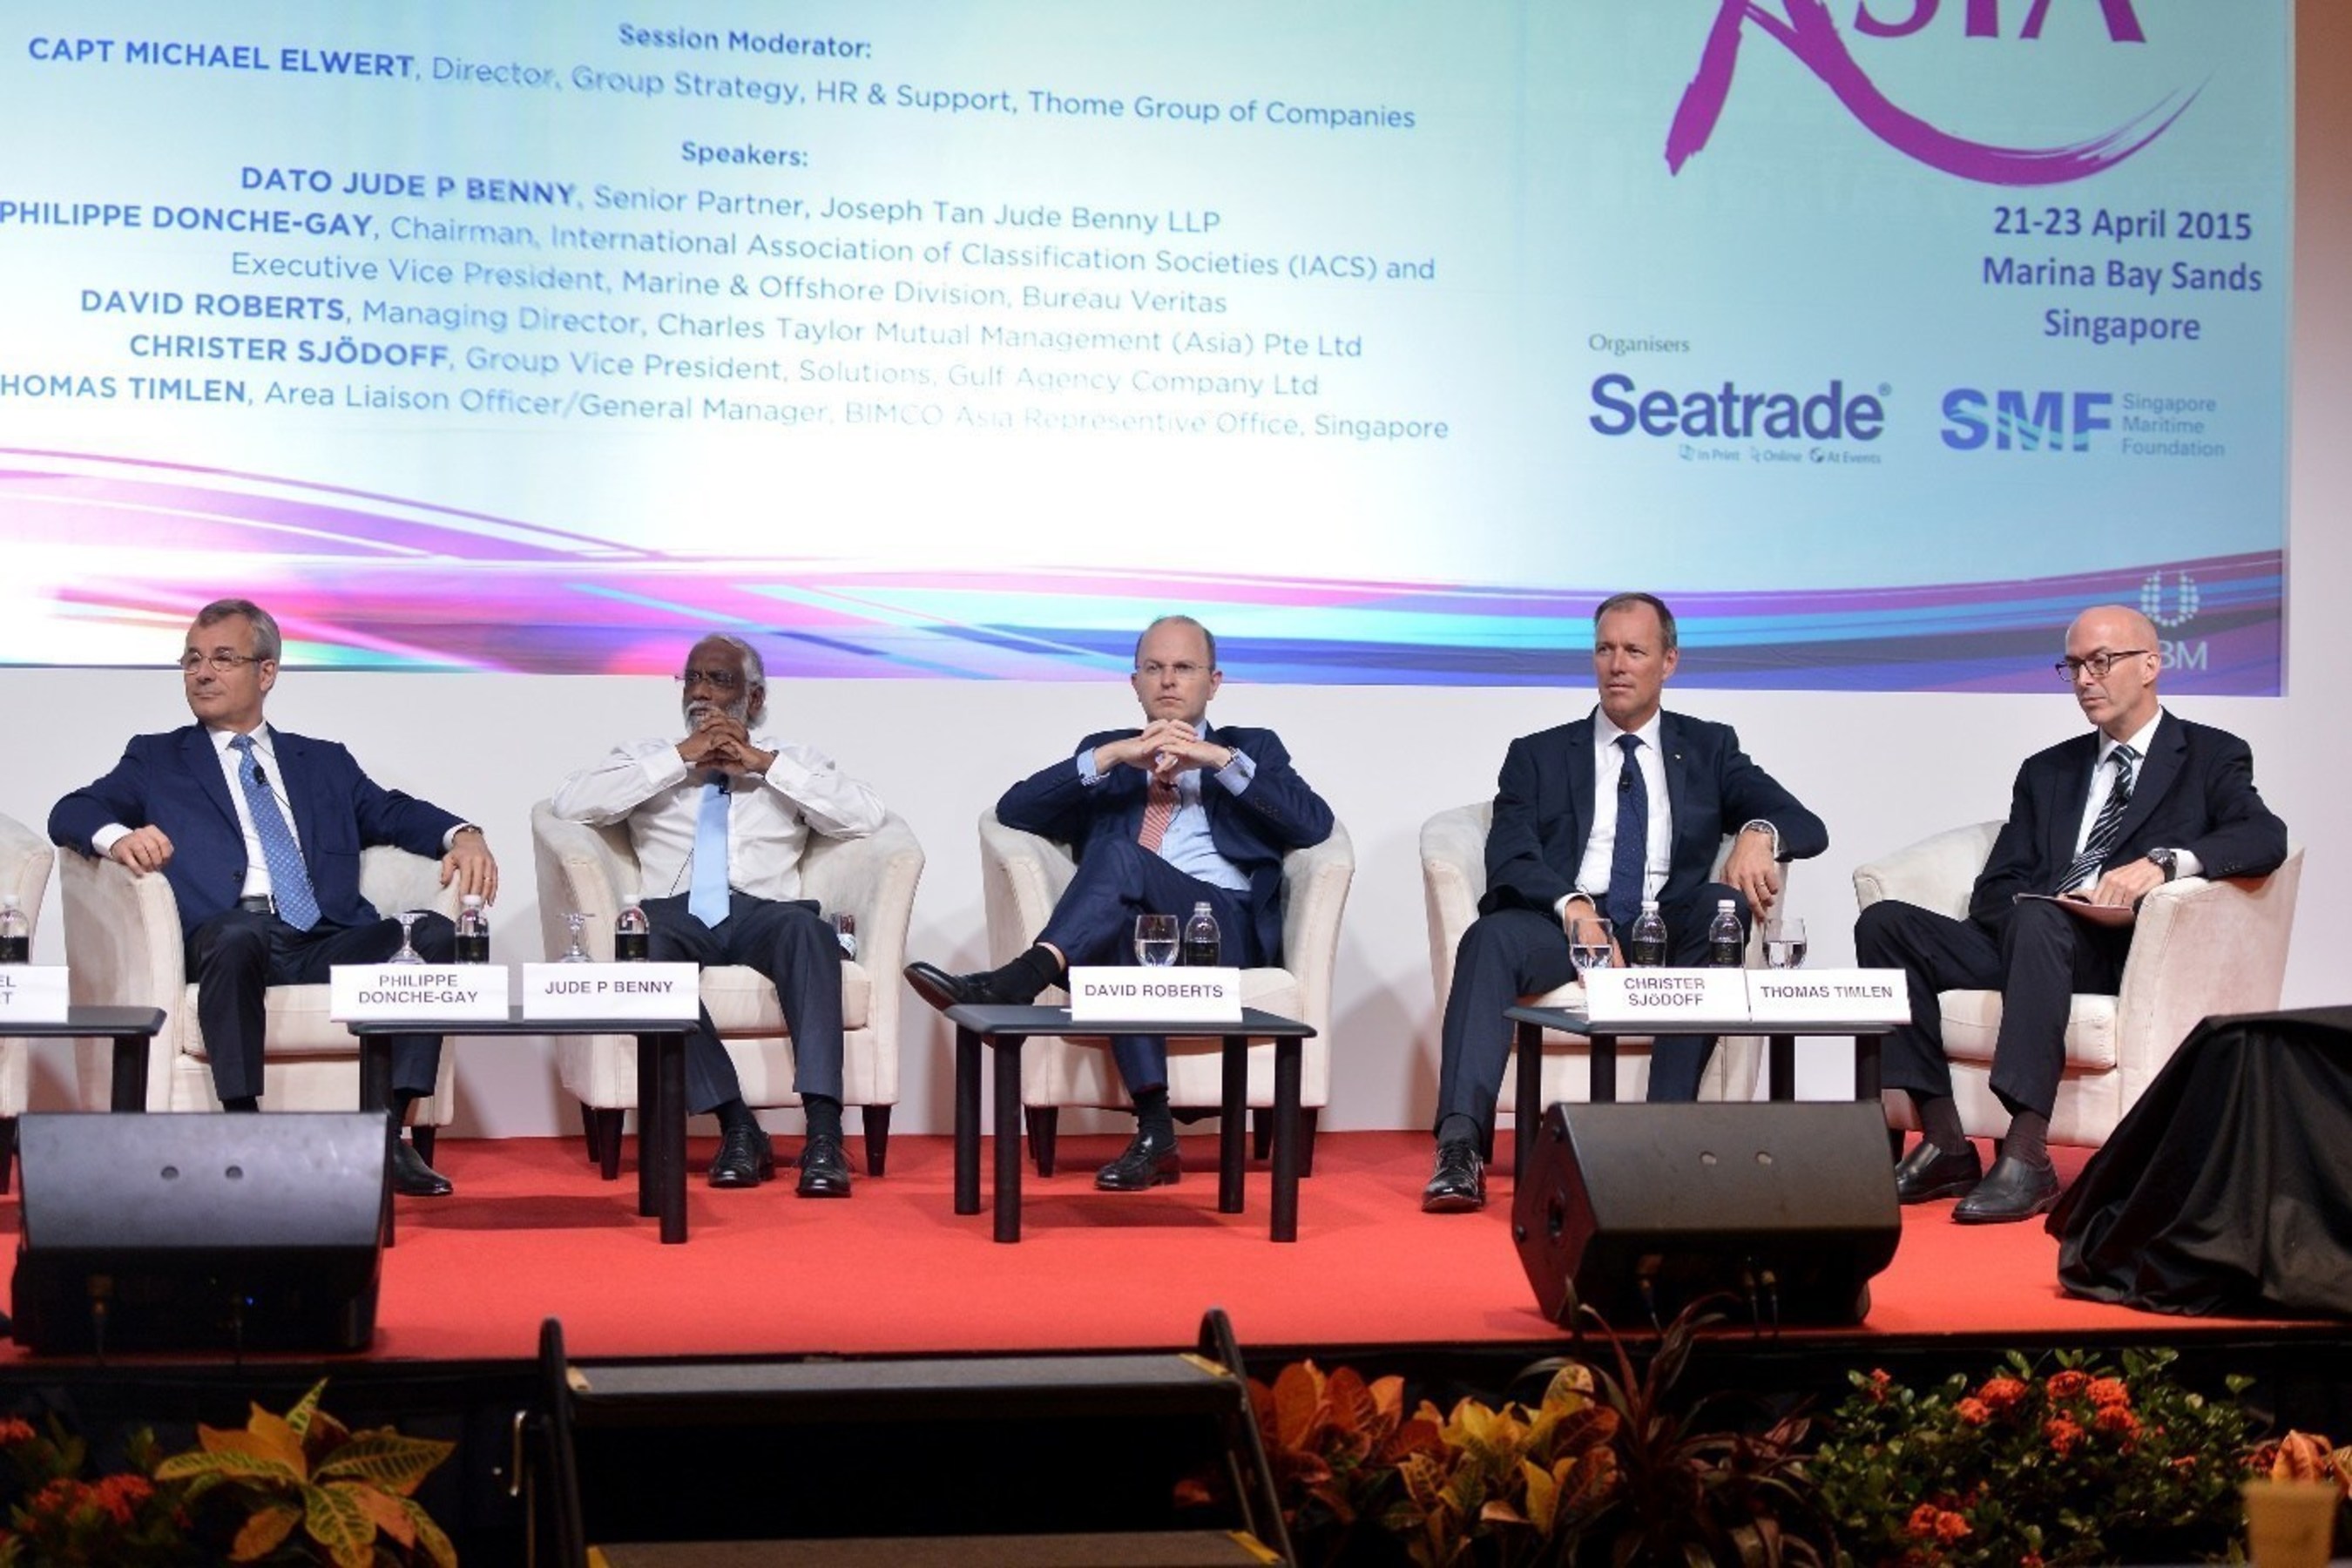 The panel of speakers at the Navigating Challenges session on the final day of Sea Asia 2015.